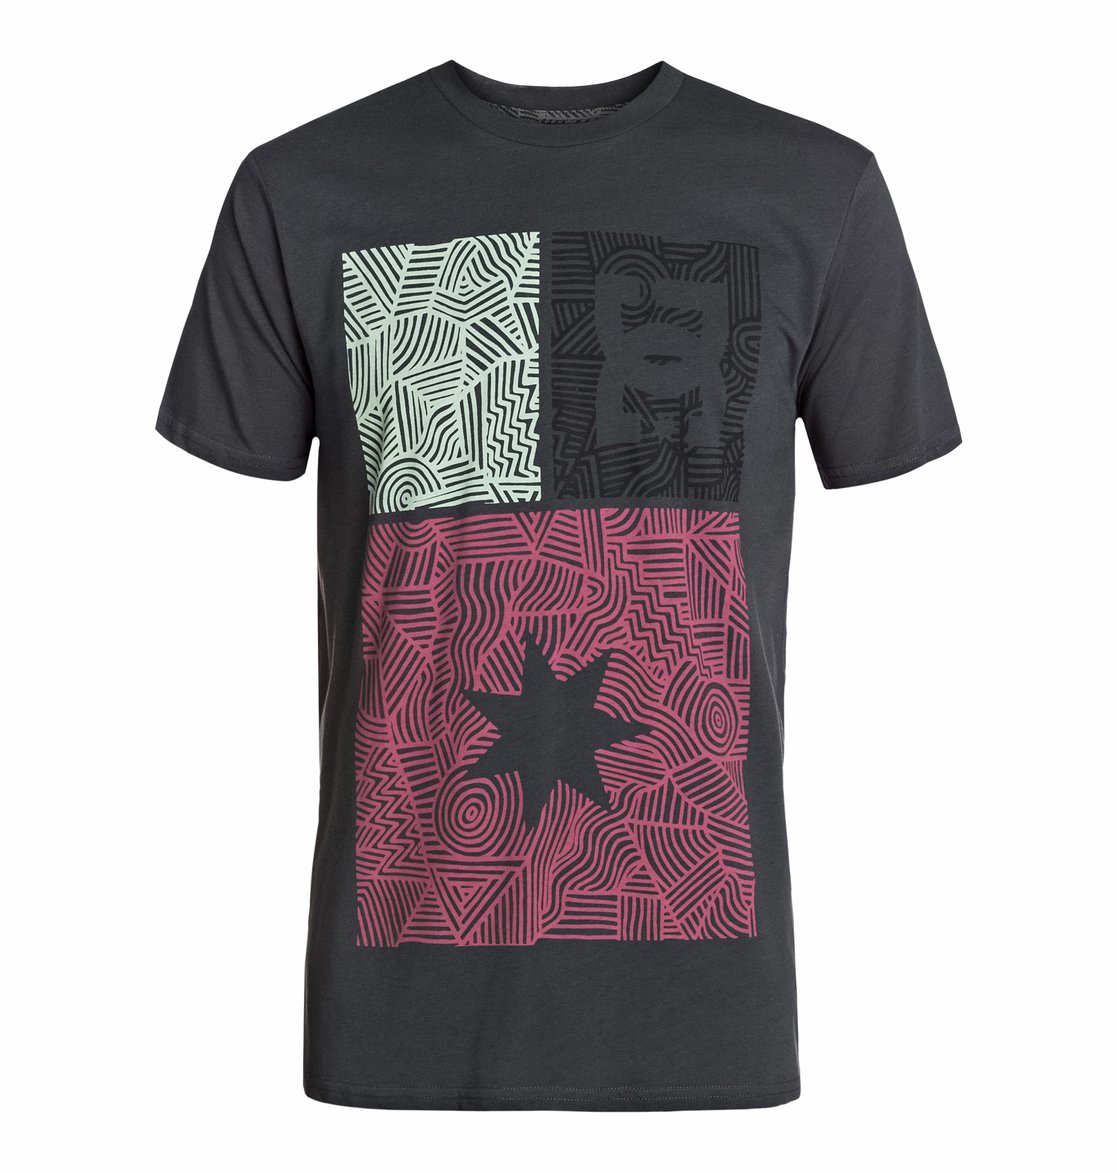 Ornate Short Sleeve - Dcshoes   Ornate SS  DC Shoes -     2015. :     ,    .<br>